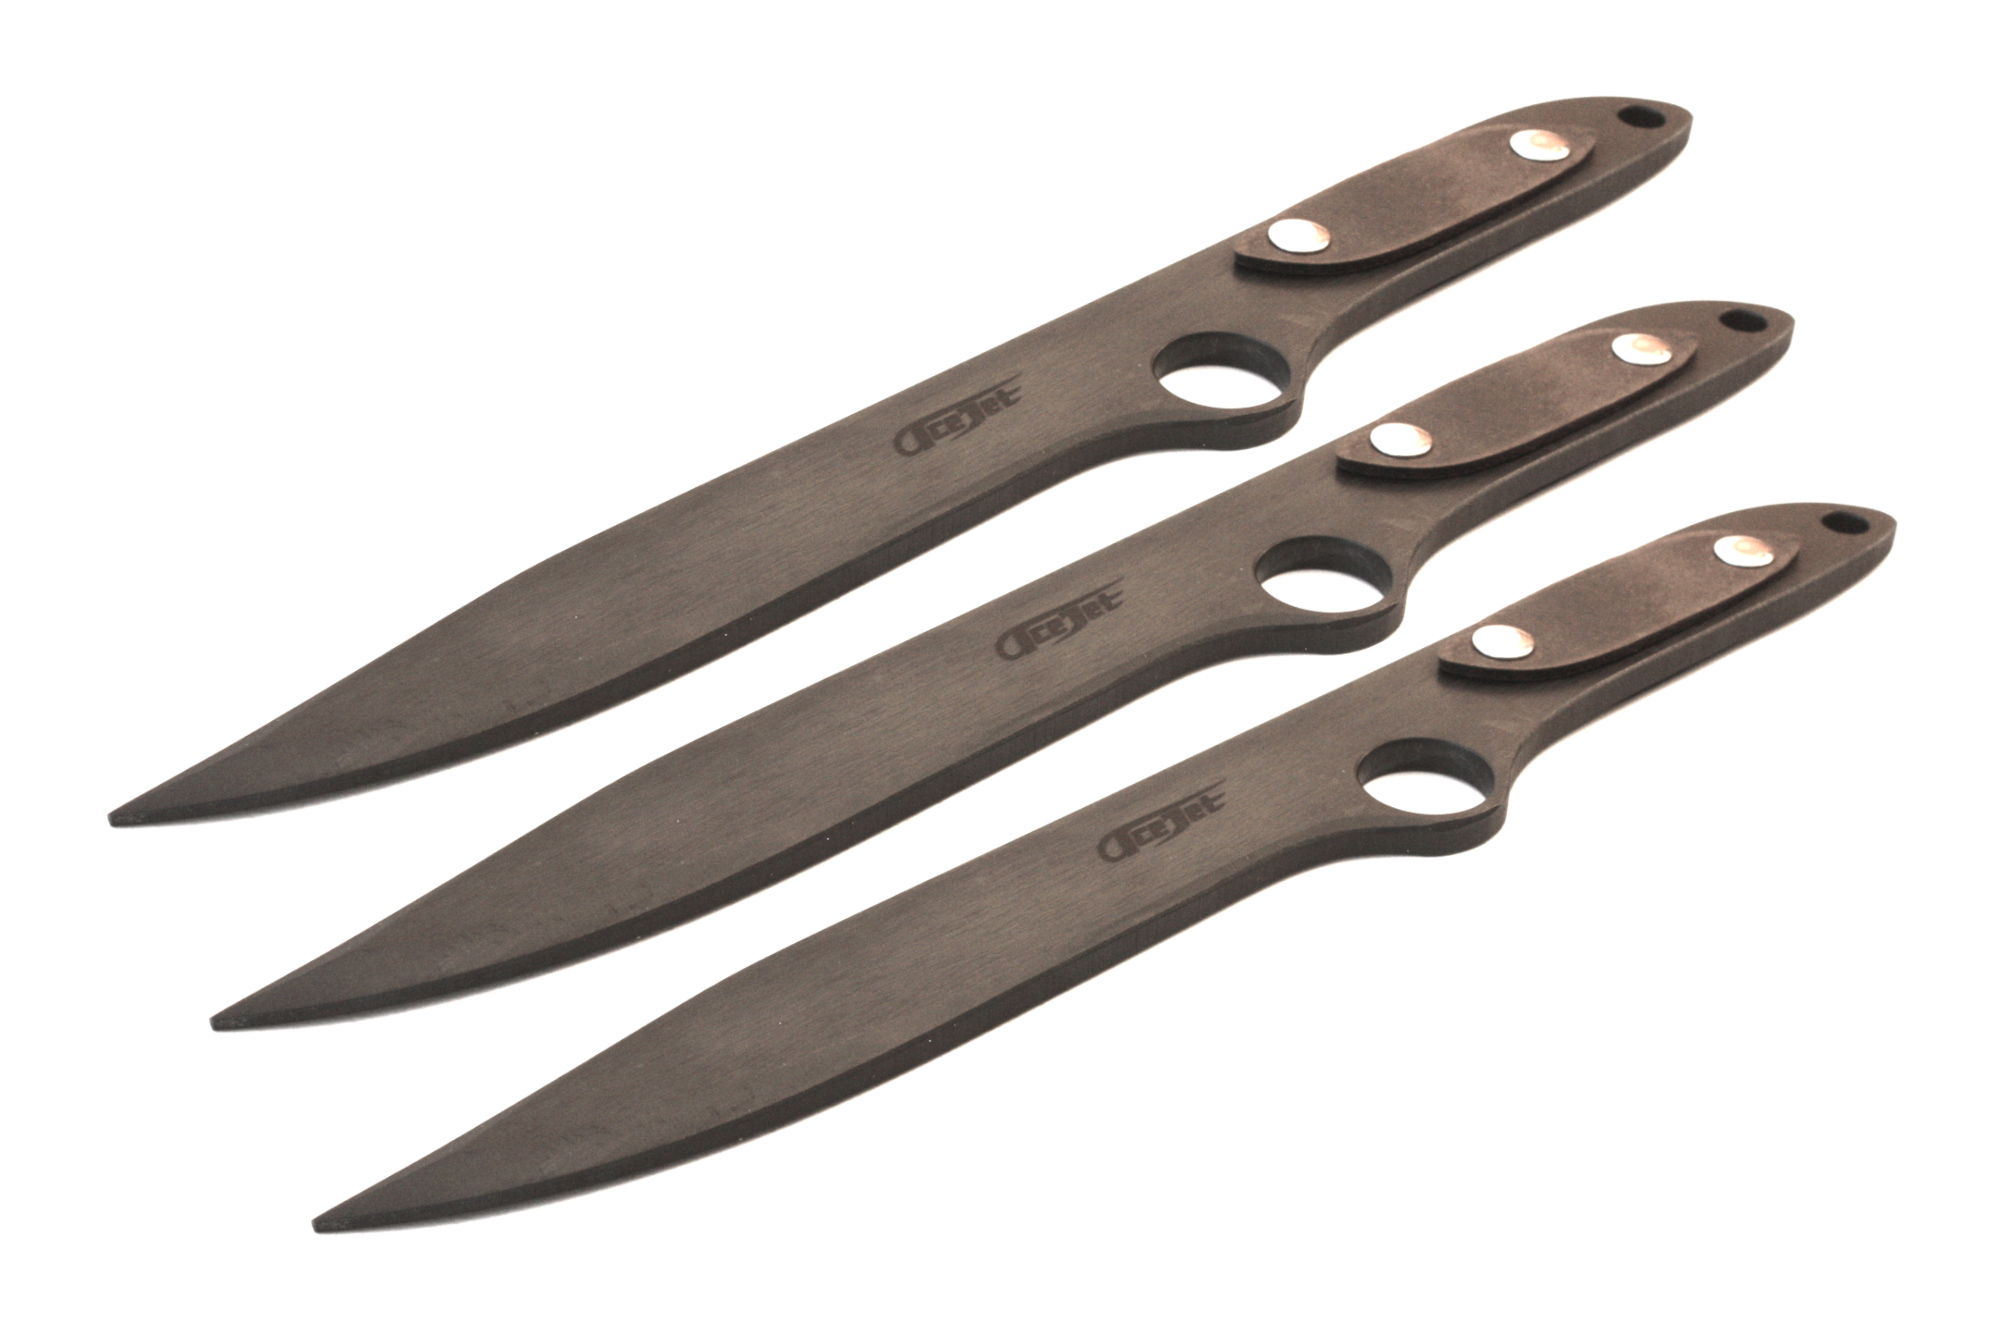 Throwing Knives, ACEJET SPINNER BOWIE Shadow Hunter 13'' brown grip -  Throwing knife - set of 3, ACEJET Store